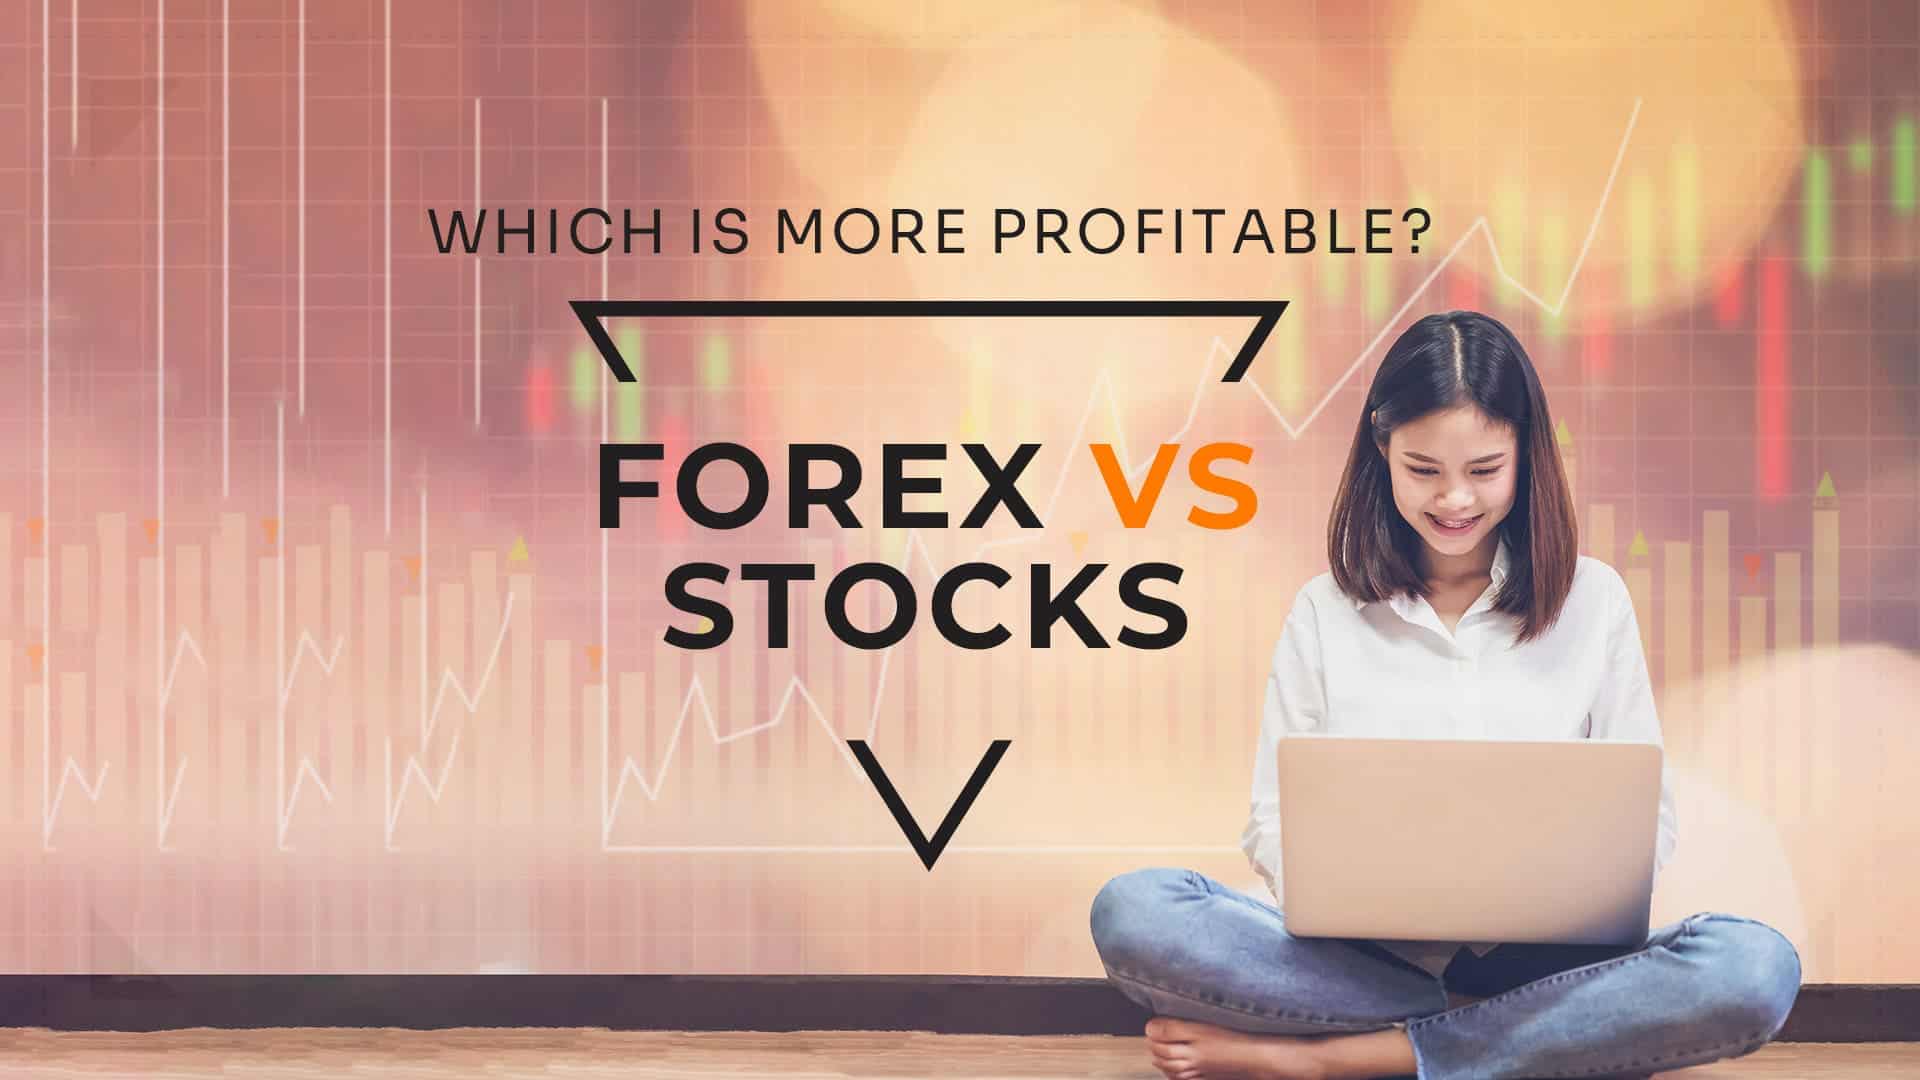 Forex Vs Stocks - Which Is More Profitable And Why? - MotivationGrid